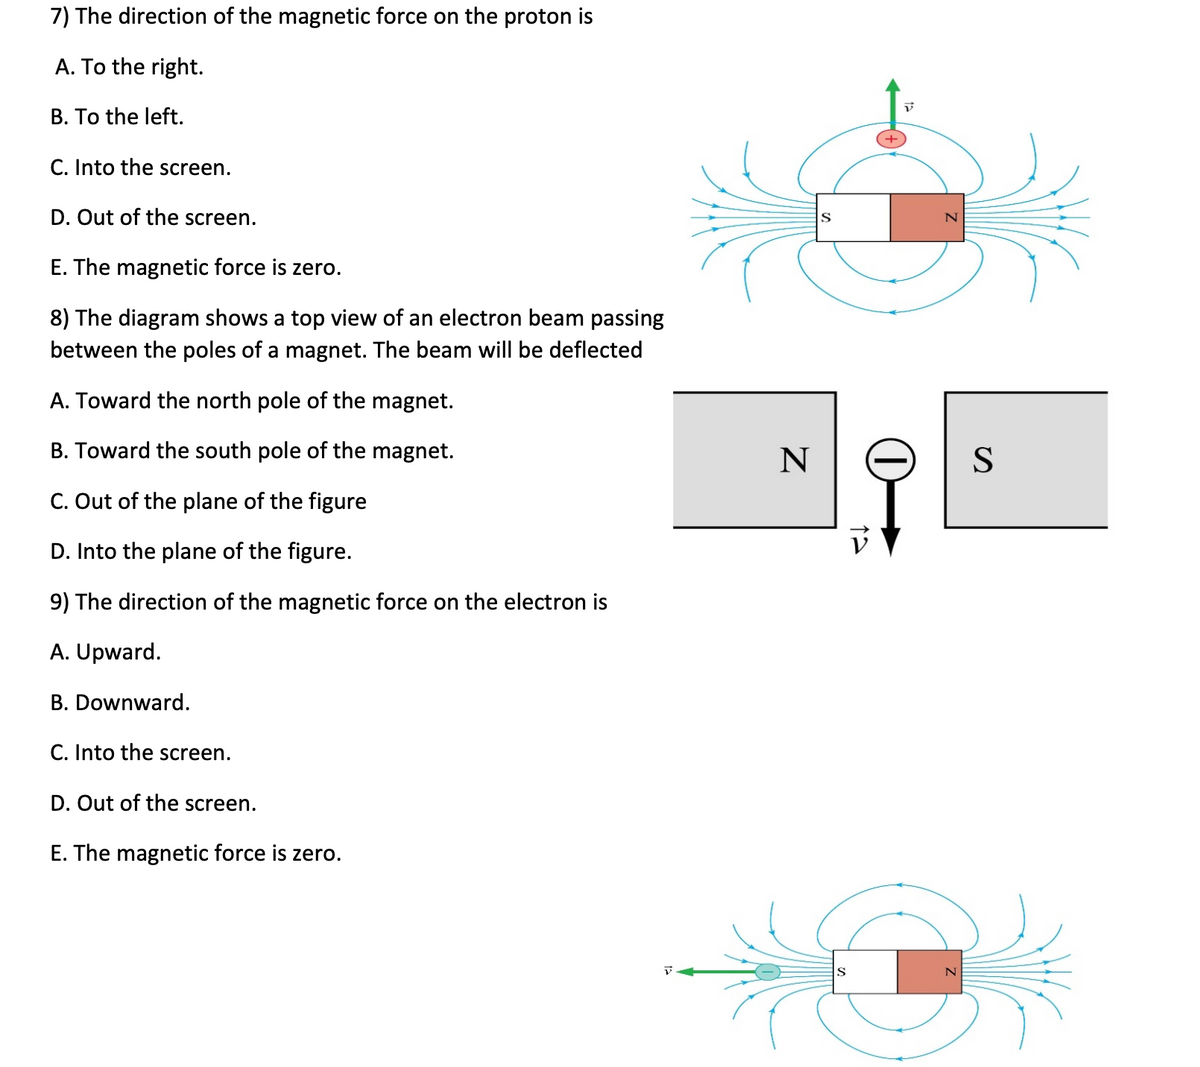 7) The direction of the magnetic force on the proton is
A. To the right.
B. To the left.
C. Into the screen.
D. Out of the screen.
E. The magnetic force is zero.
8) The diagram shows a top view of an electron beam passing
between the poles of a magnet. The beam will be deflected
A. Toward the north pole of the magnet.
B. Toward the south pole of the magnet.
C. Out of the plane of the figure
D. Into the plane of the figure.
9) The direction of the magnetic force on the electron is
A. Upward.
B. Downward.
C. Into the screen.
D. Out of the screen.
E. The magnetic force is zero.
N
S
S
12
N
N
S